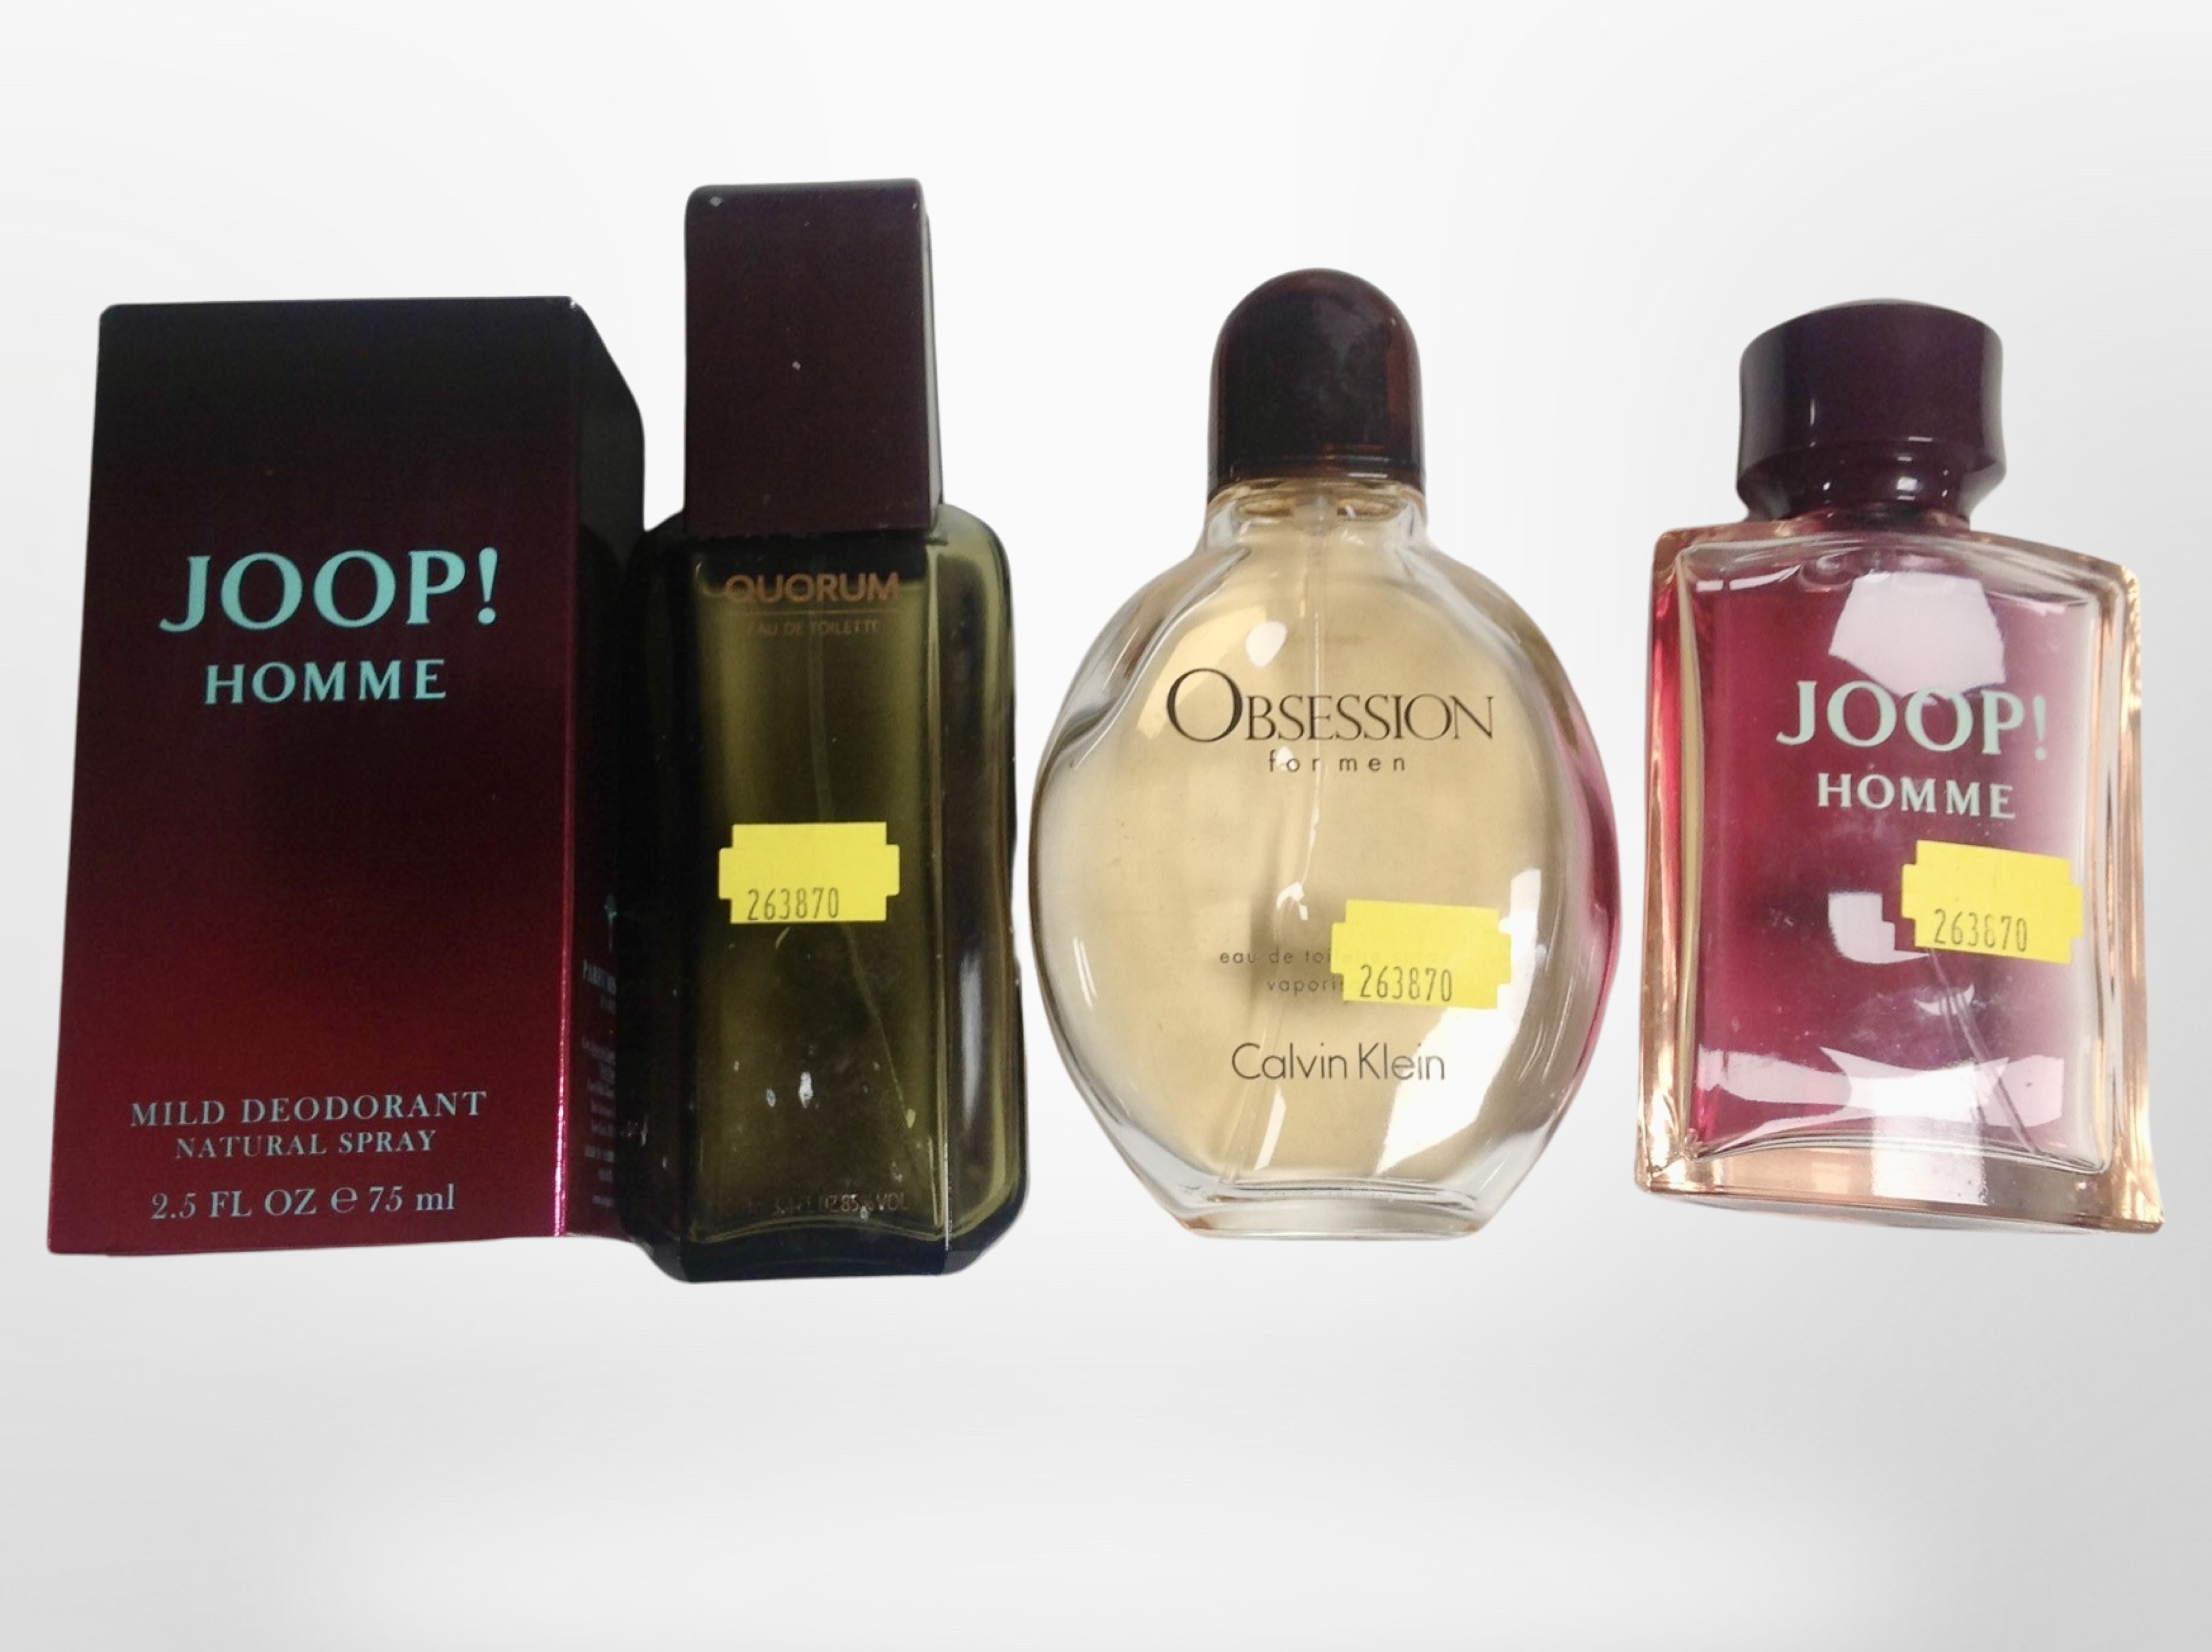 A bottle of Joop Homme natural spray, 75ml, in box, and three further fragrances (opened).